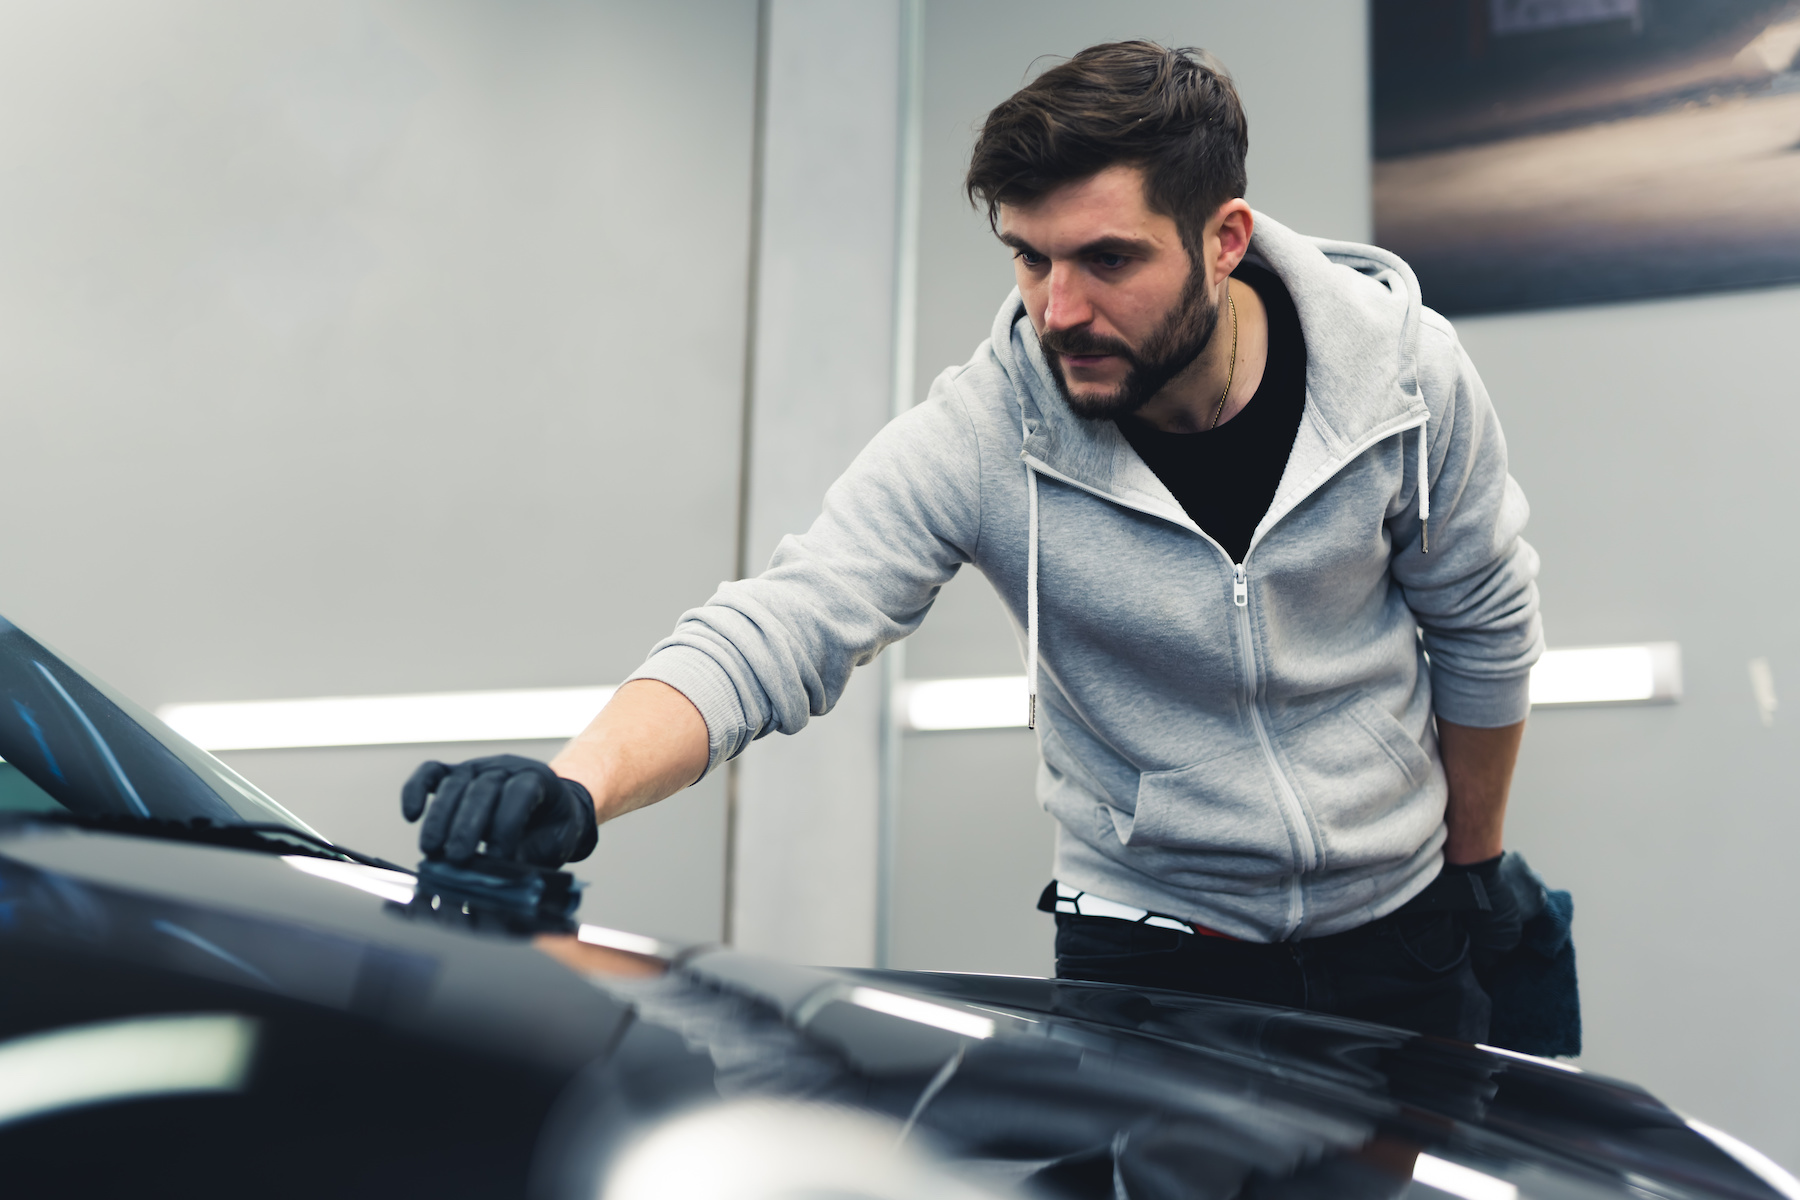 How to Choose the Right Ceramic Coating for Automotive Applications